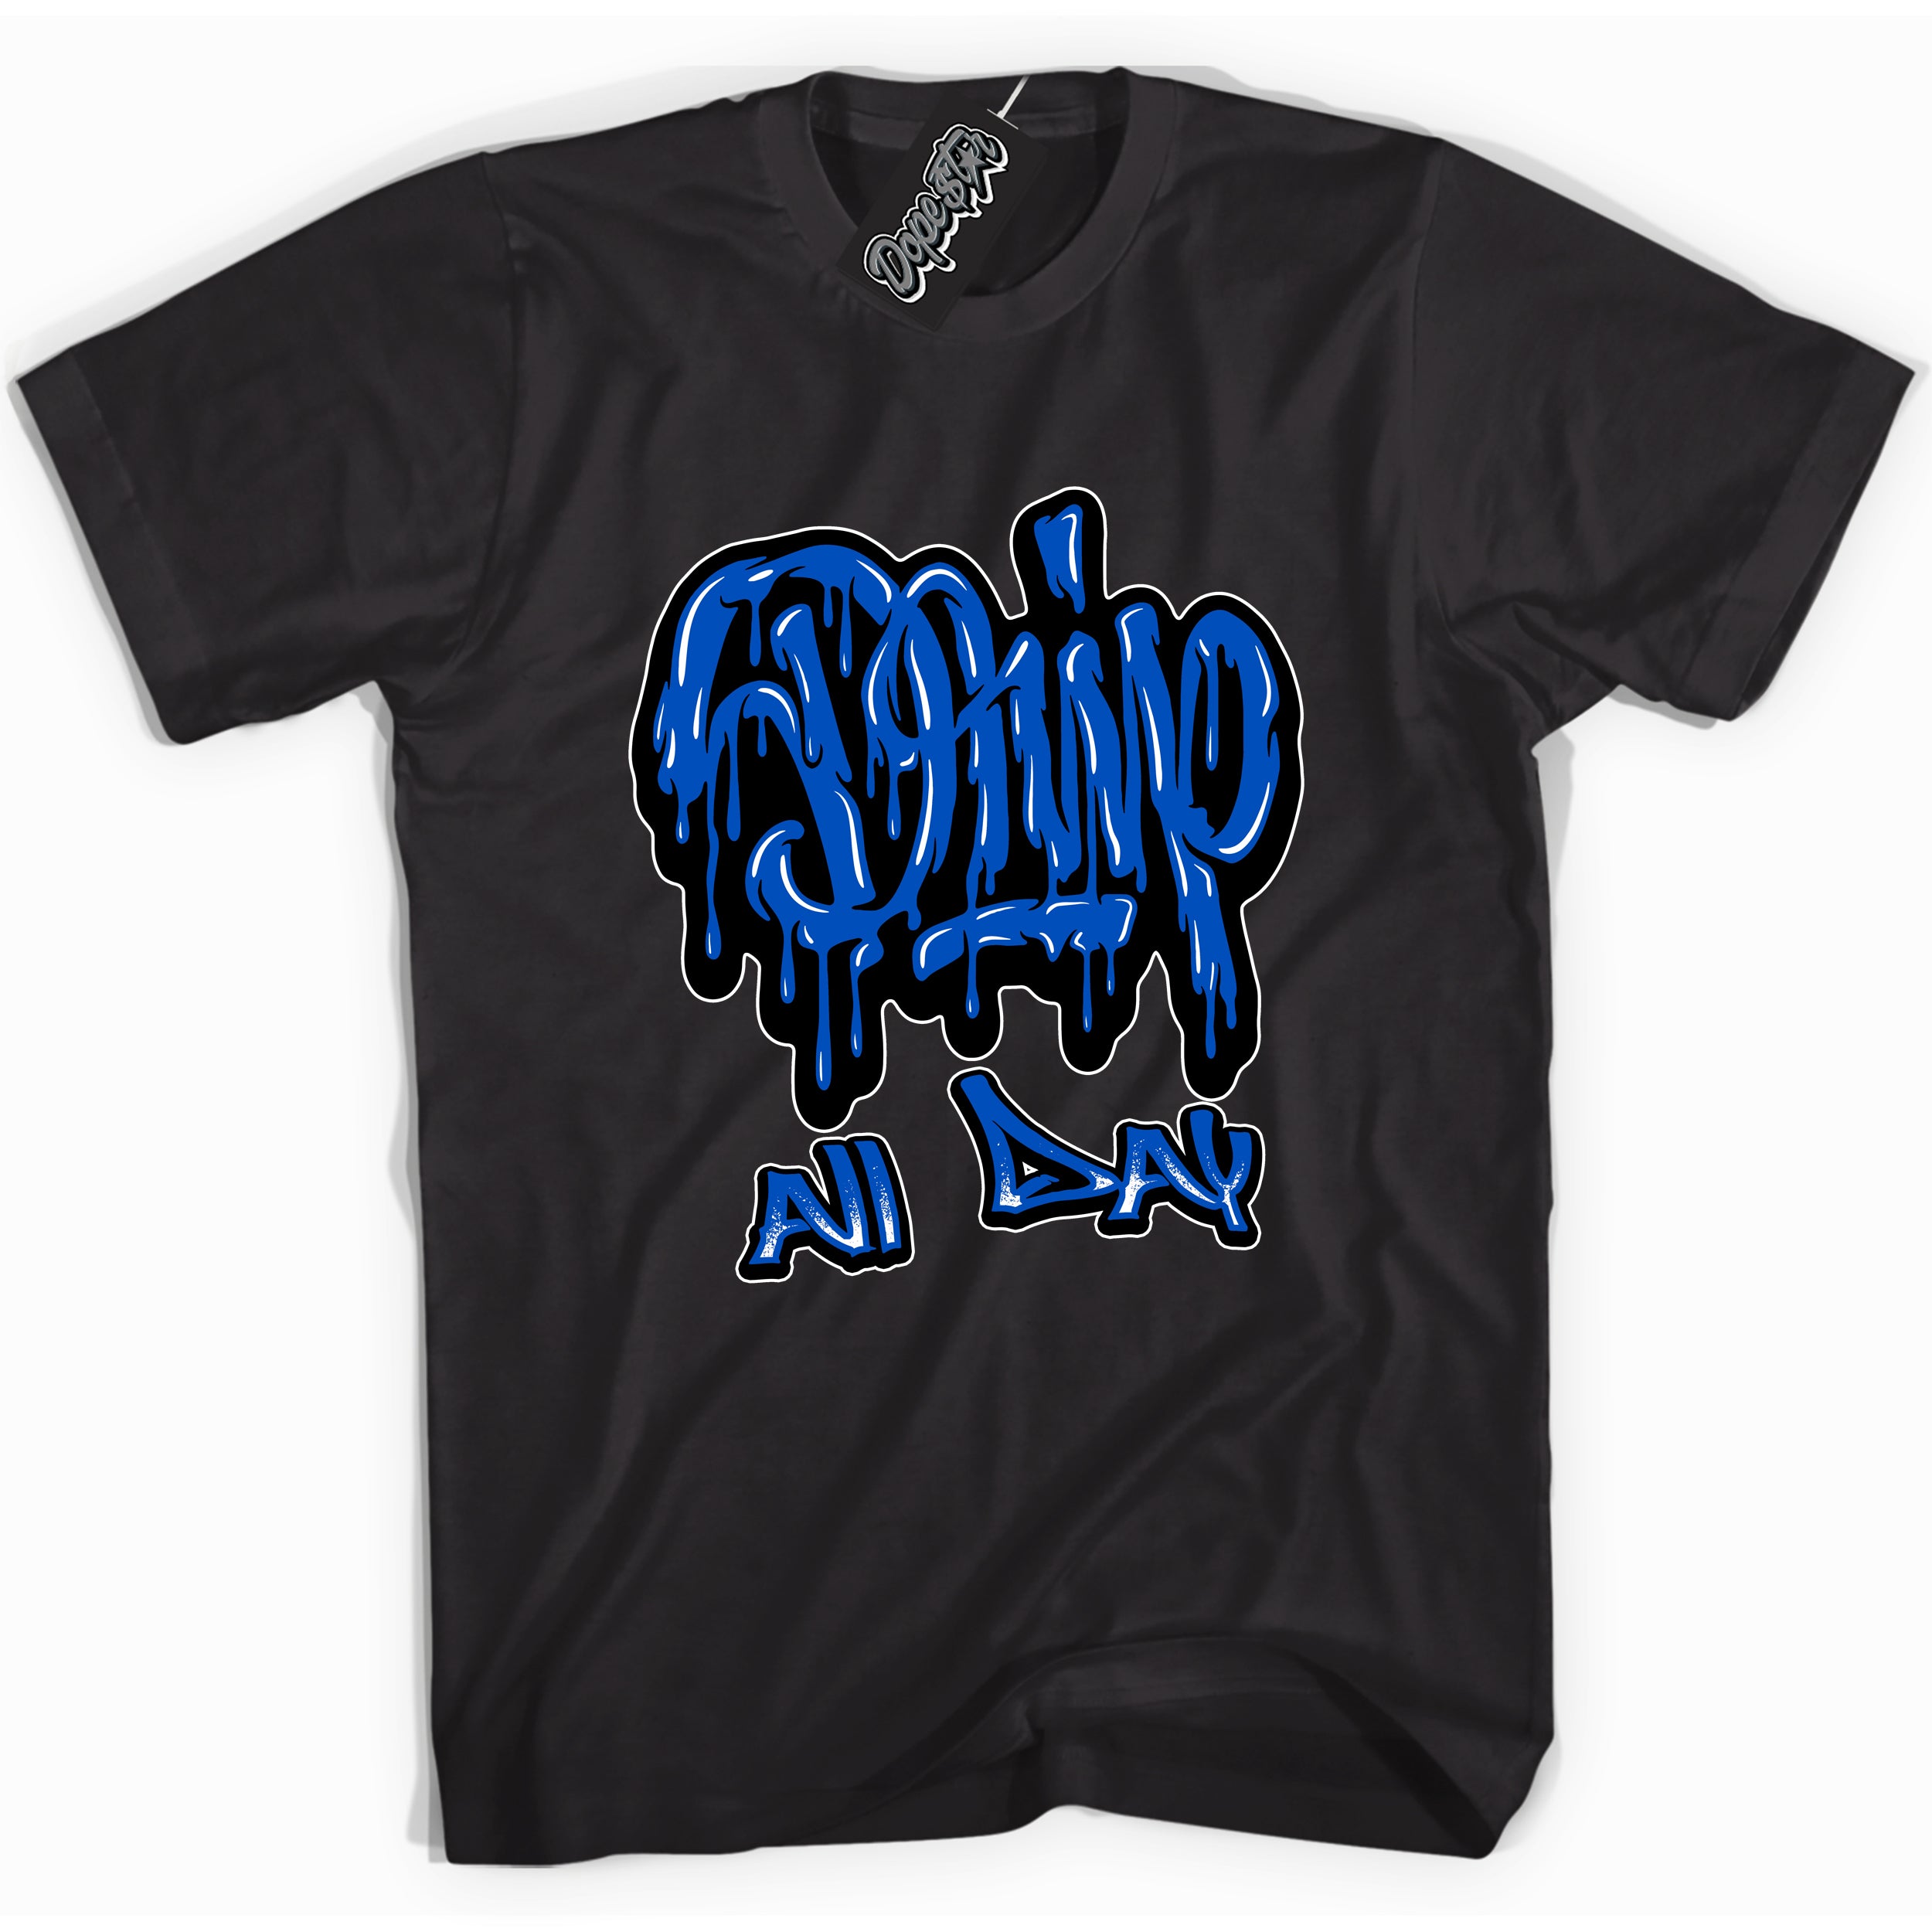 Cool Black graphic tee with "Drip All Day" design, that perfectly matches Royal Reimagined 1s sneakers 